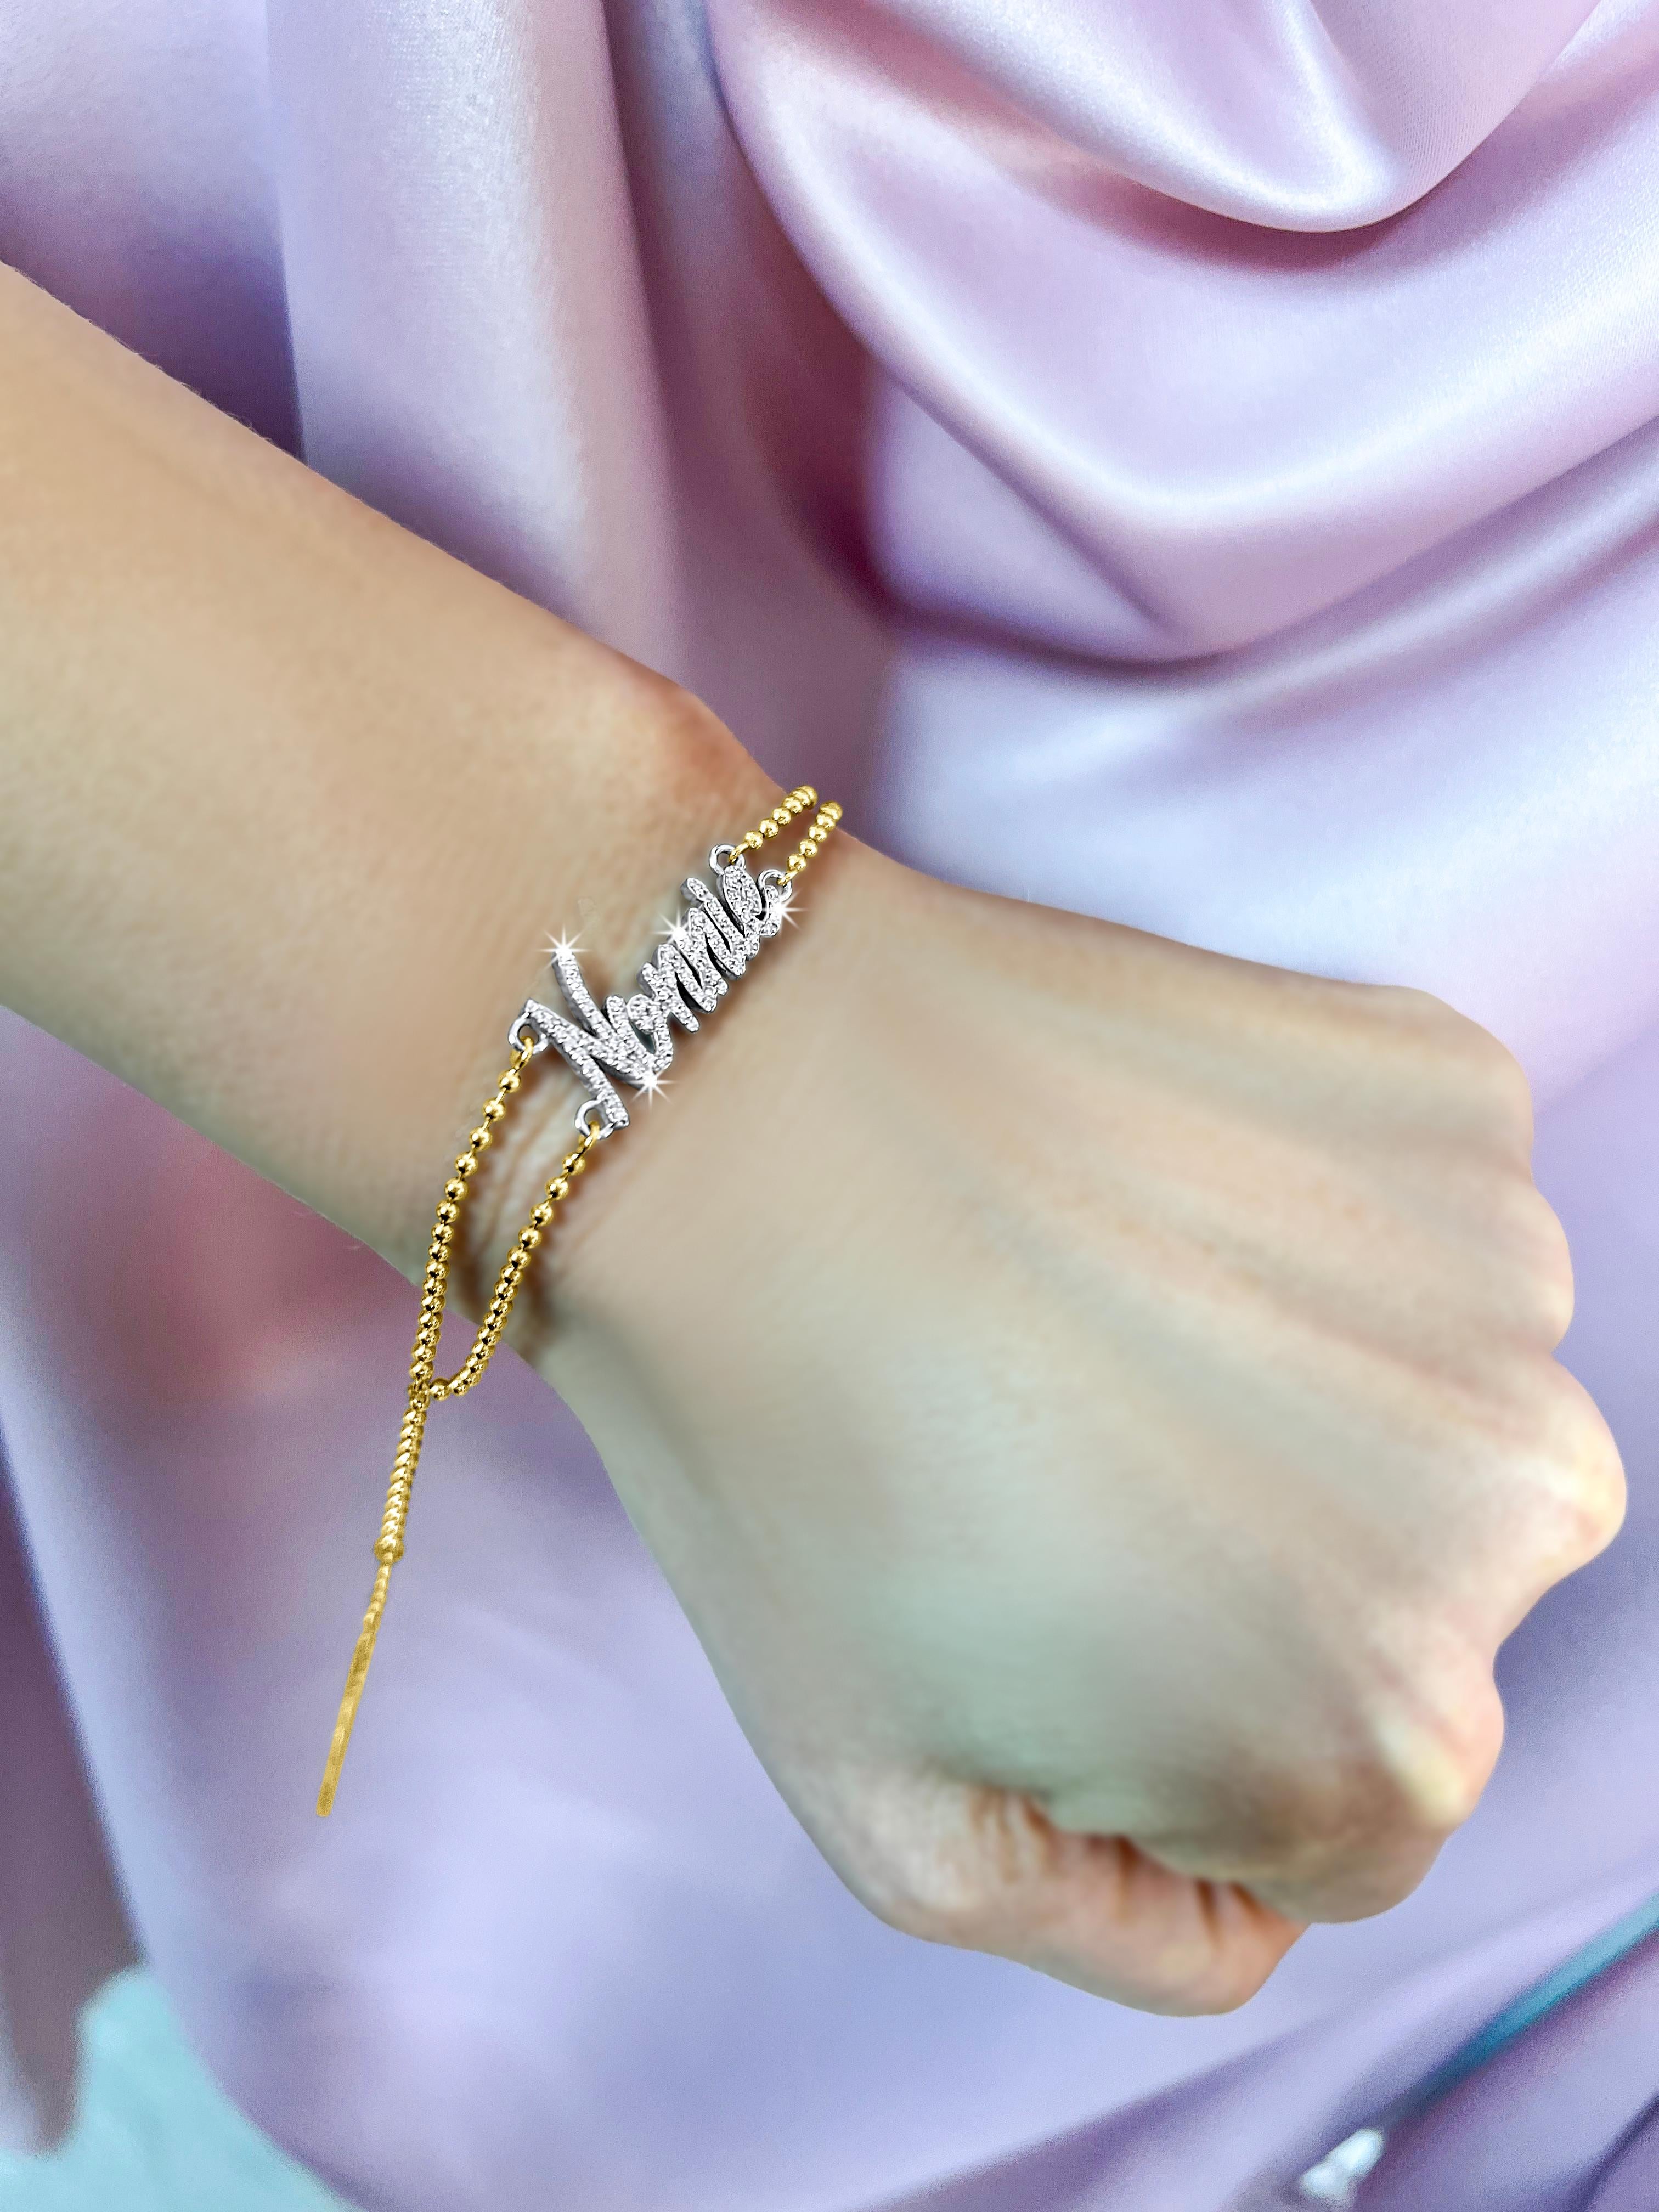 Bracelet Information
Diamond Type : Natural Diamond
Metal : 14k Gold
Metal Color : Yellow Gold, White Gold
Diamond Type : Round Diamond
 

Introducing our exquisite piece of jewelry featuring the captivating beauty of 14K White & Yellow Gold with